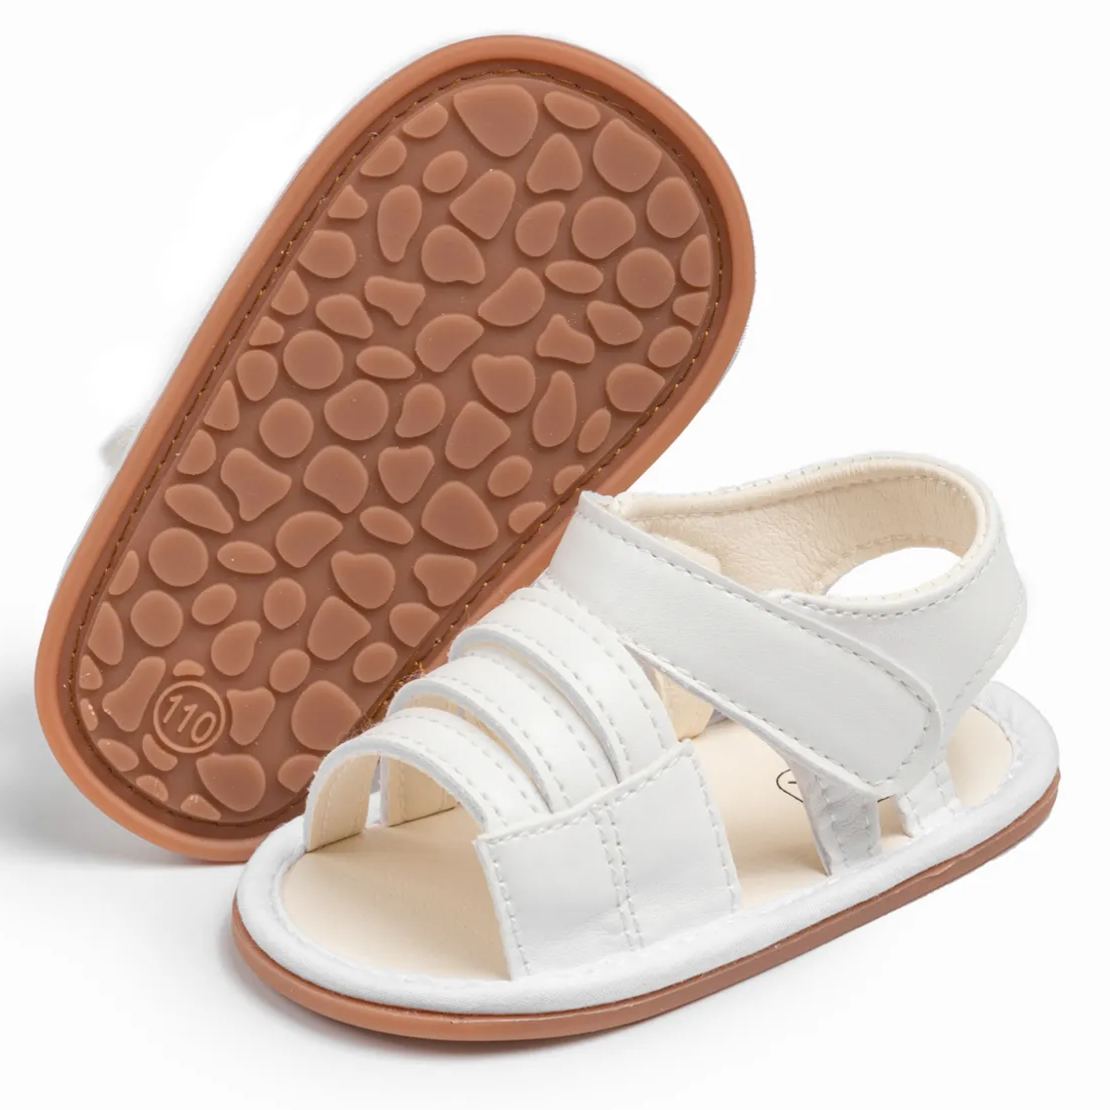 Clearance Toddler Girls Summer Sandals Toddler Shoes Baby Girls Cute  Fashion Pearl Bow Sequins Non-slip Small Leather Princess Shoes,Silver  Sandals For Kids Size 7.5-8 Years - Walmart.com